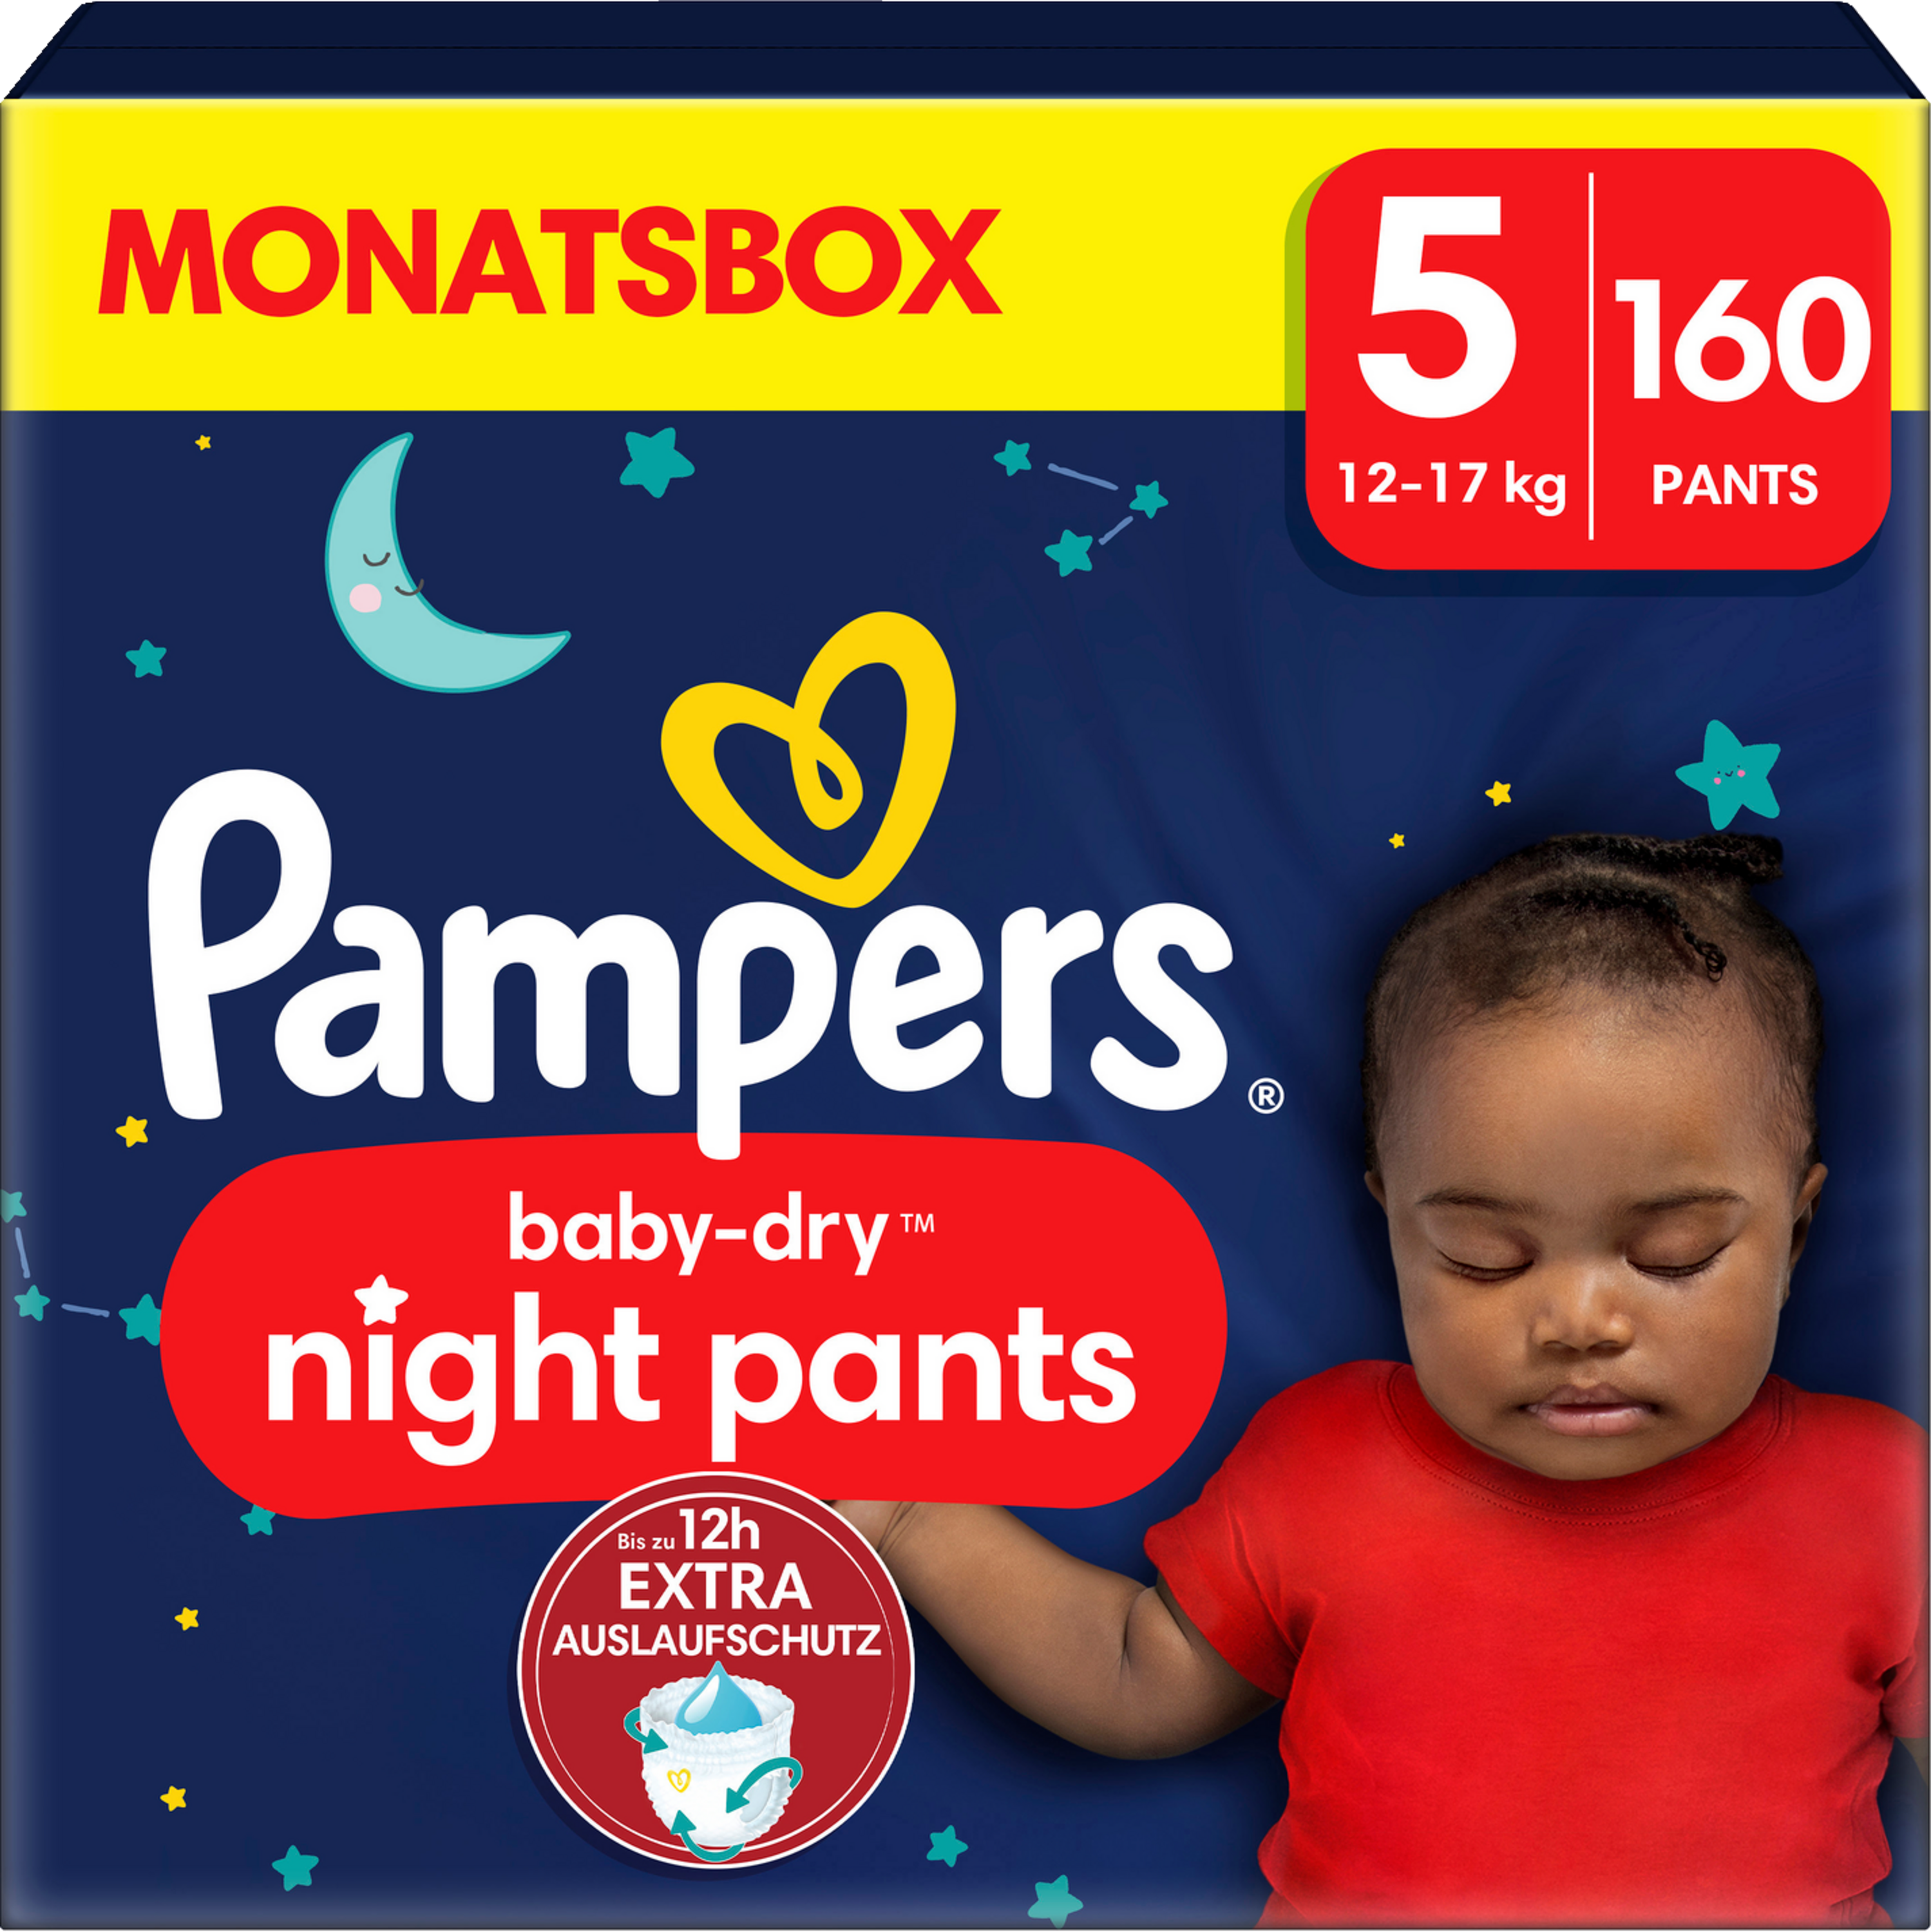 Pampers Premium Protection Pants Couches culottes T6 +15kg, 27 couches